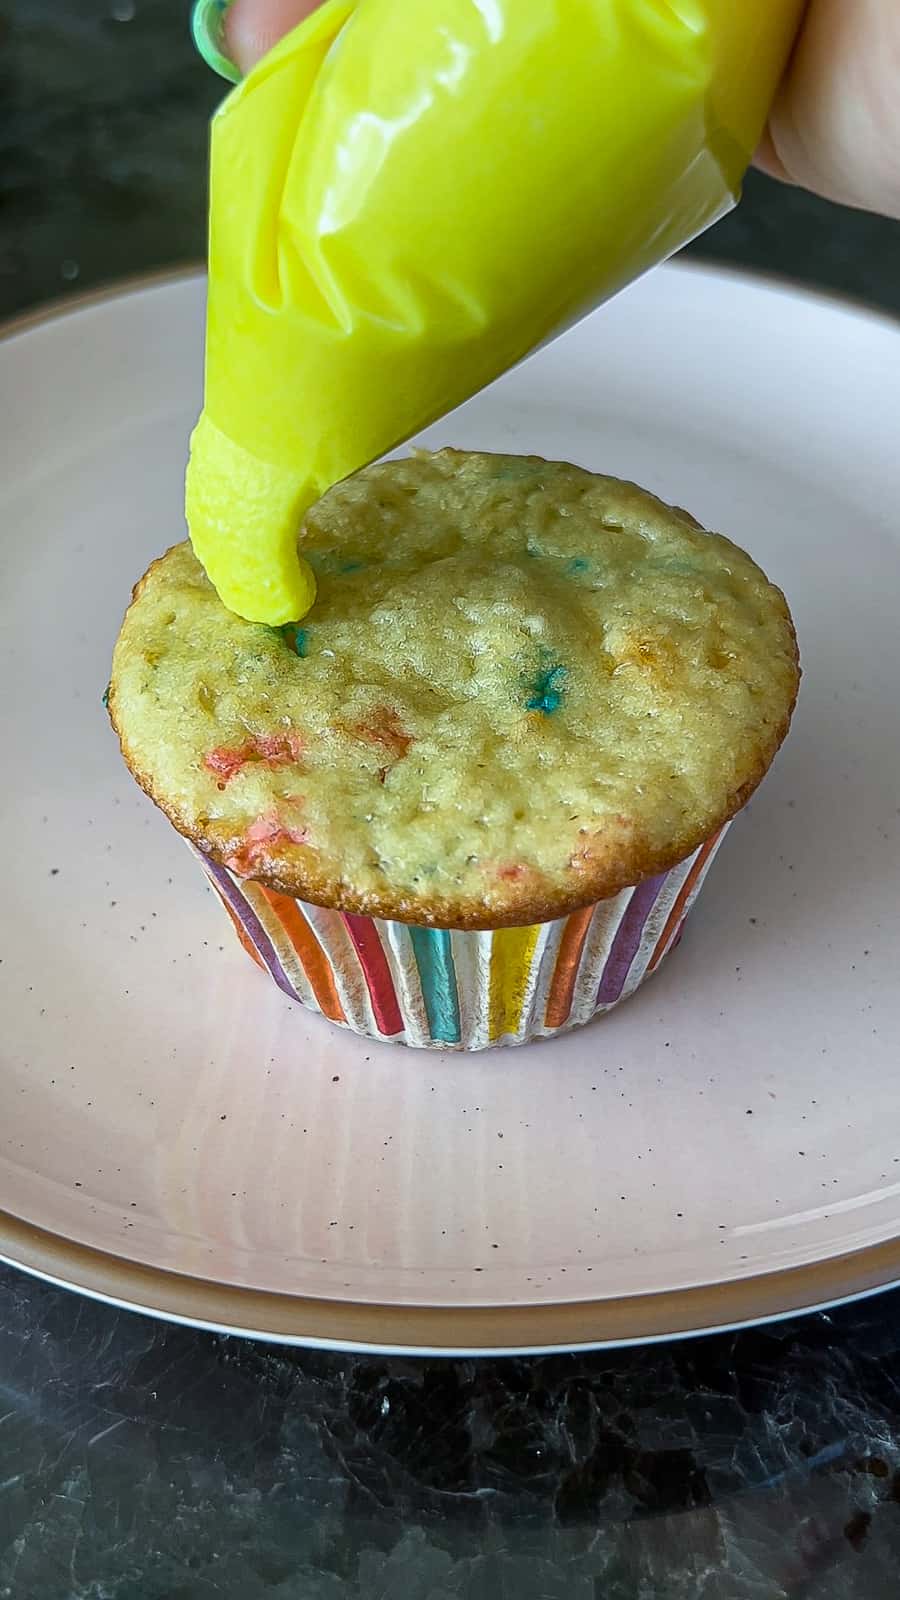 Adding frosting to Funfetti Cupcakes